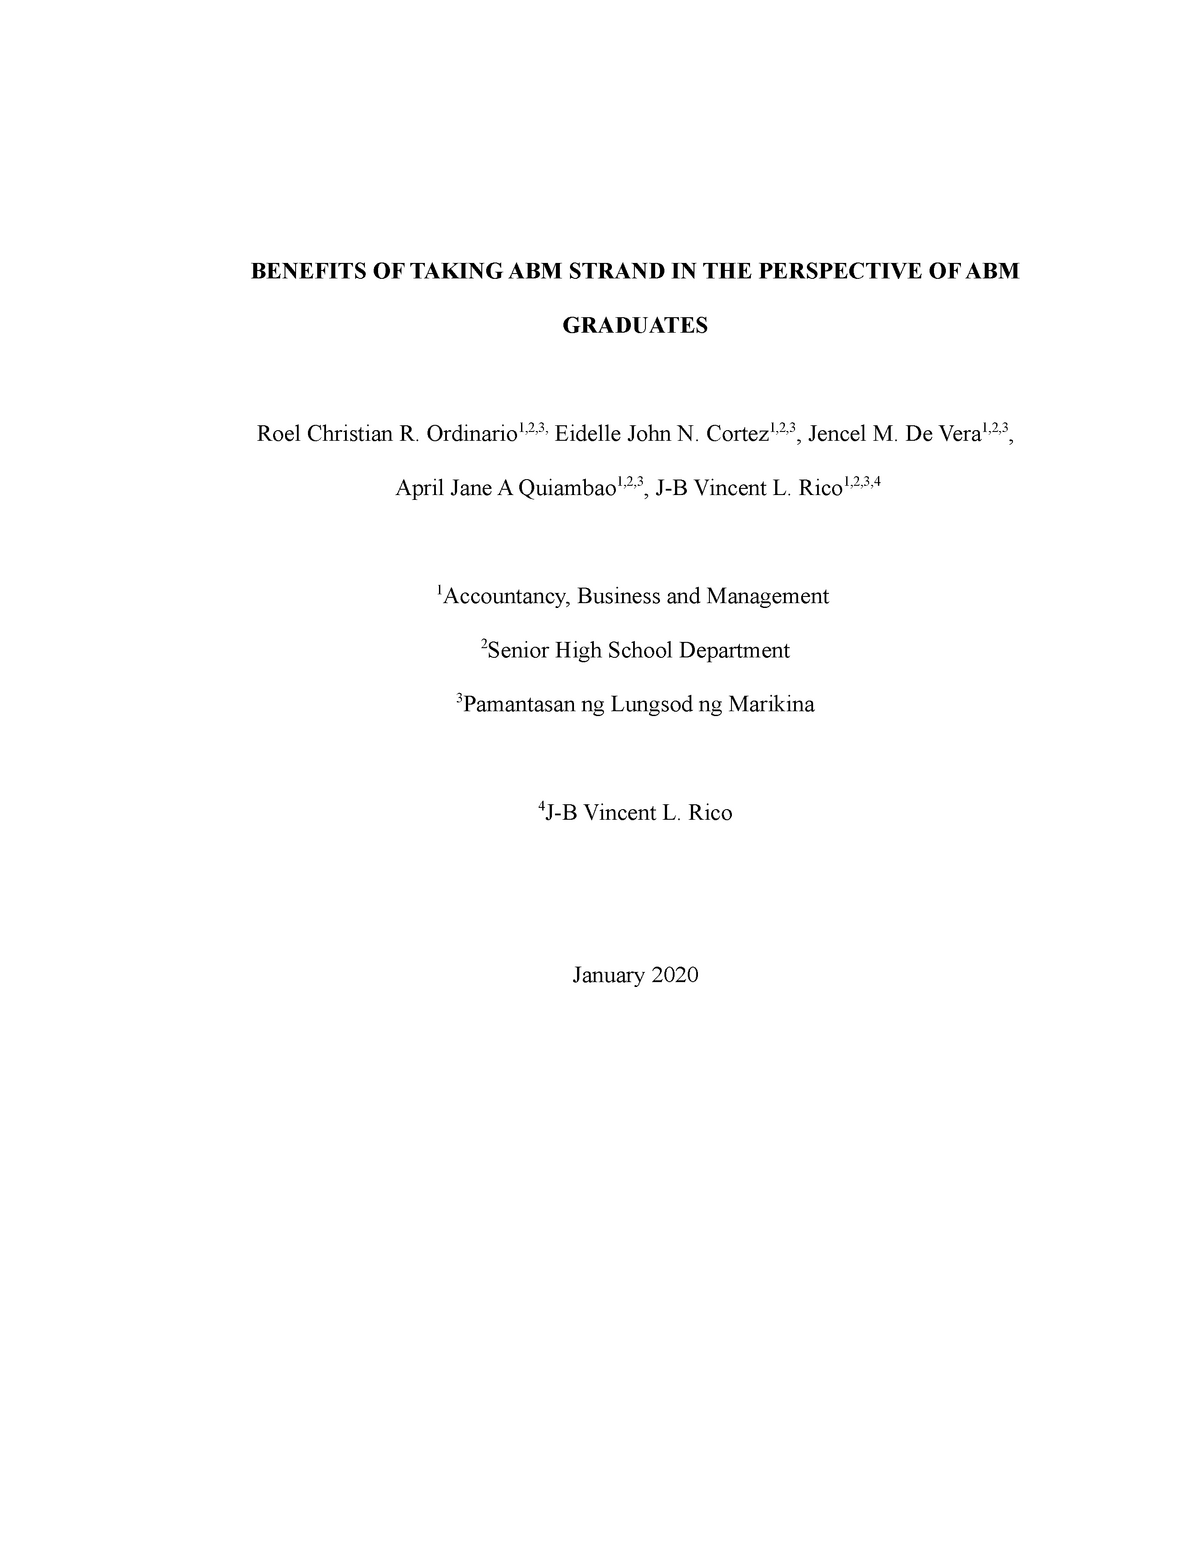 qualitative research title about abm strand